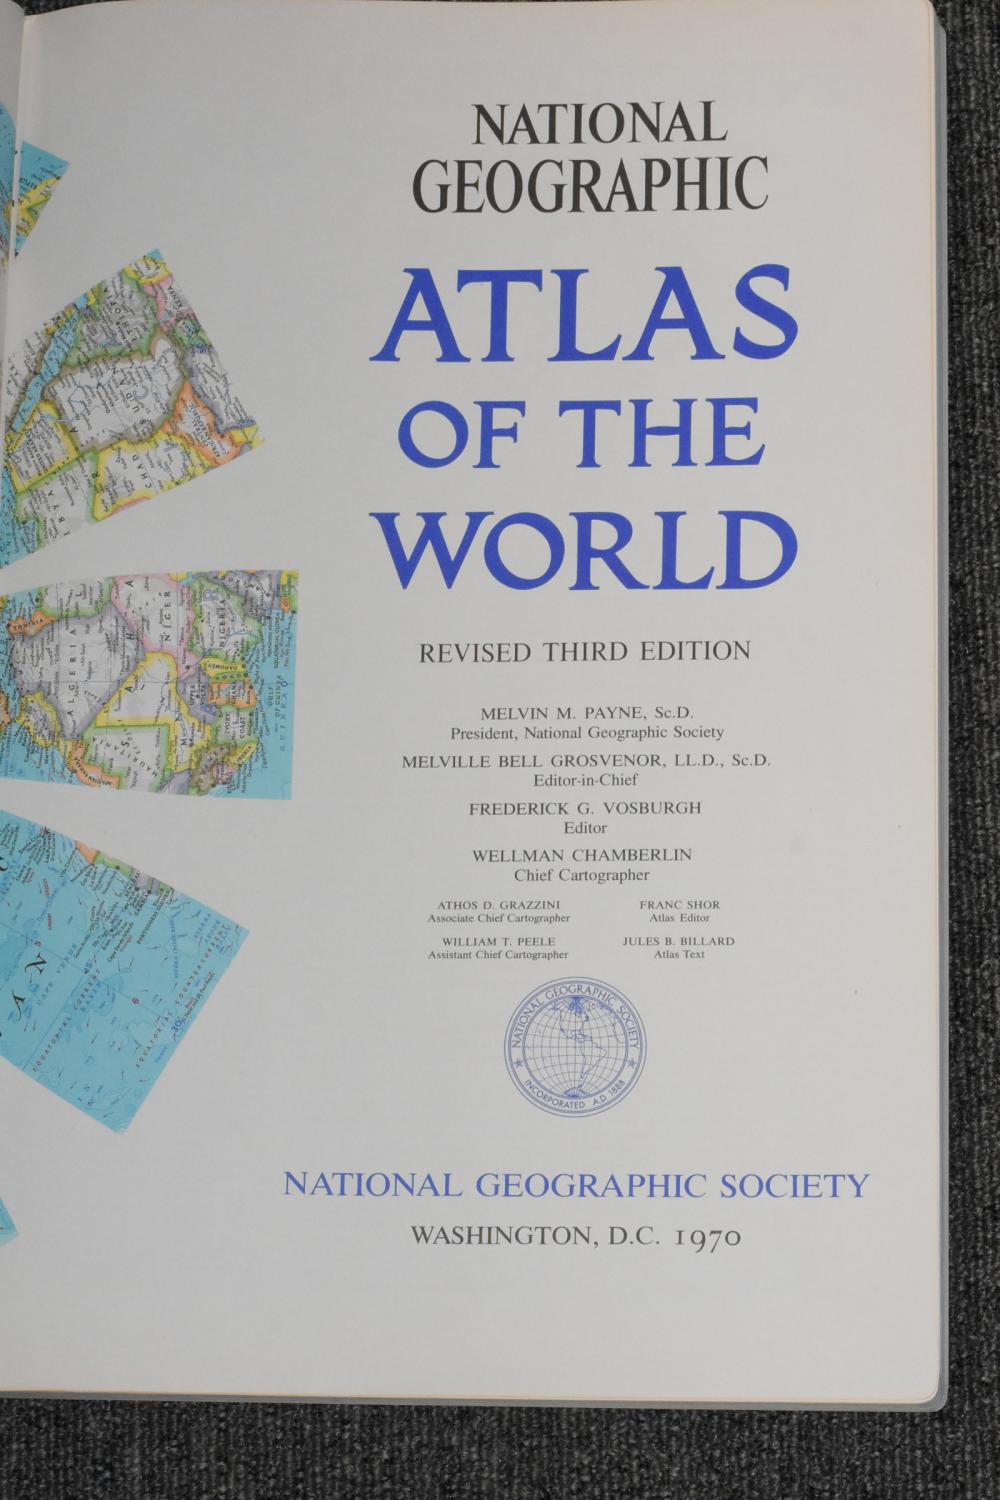 National Geographic Atlas of the World (